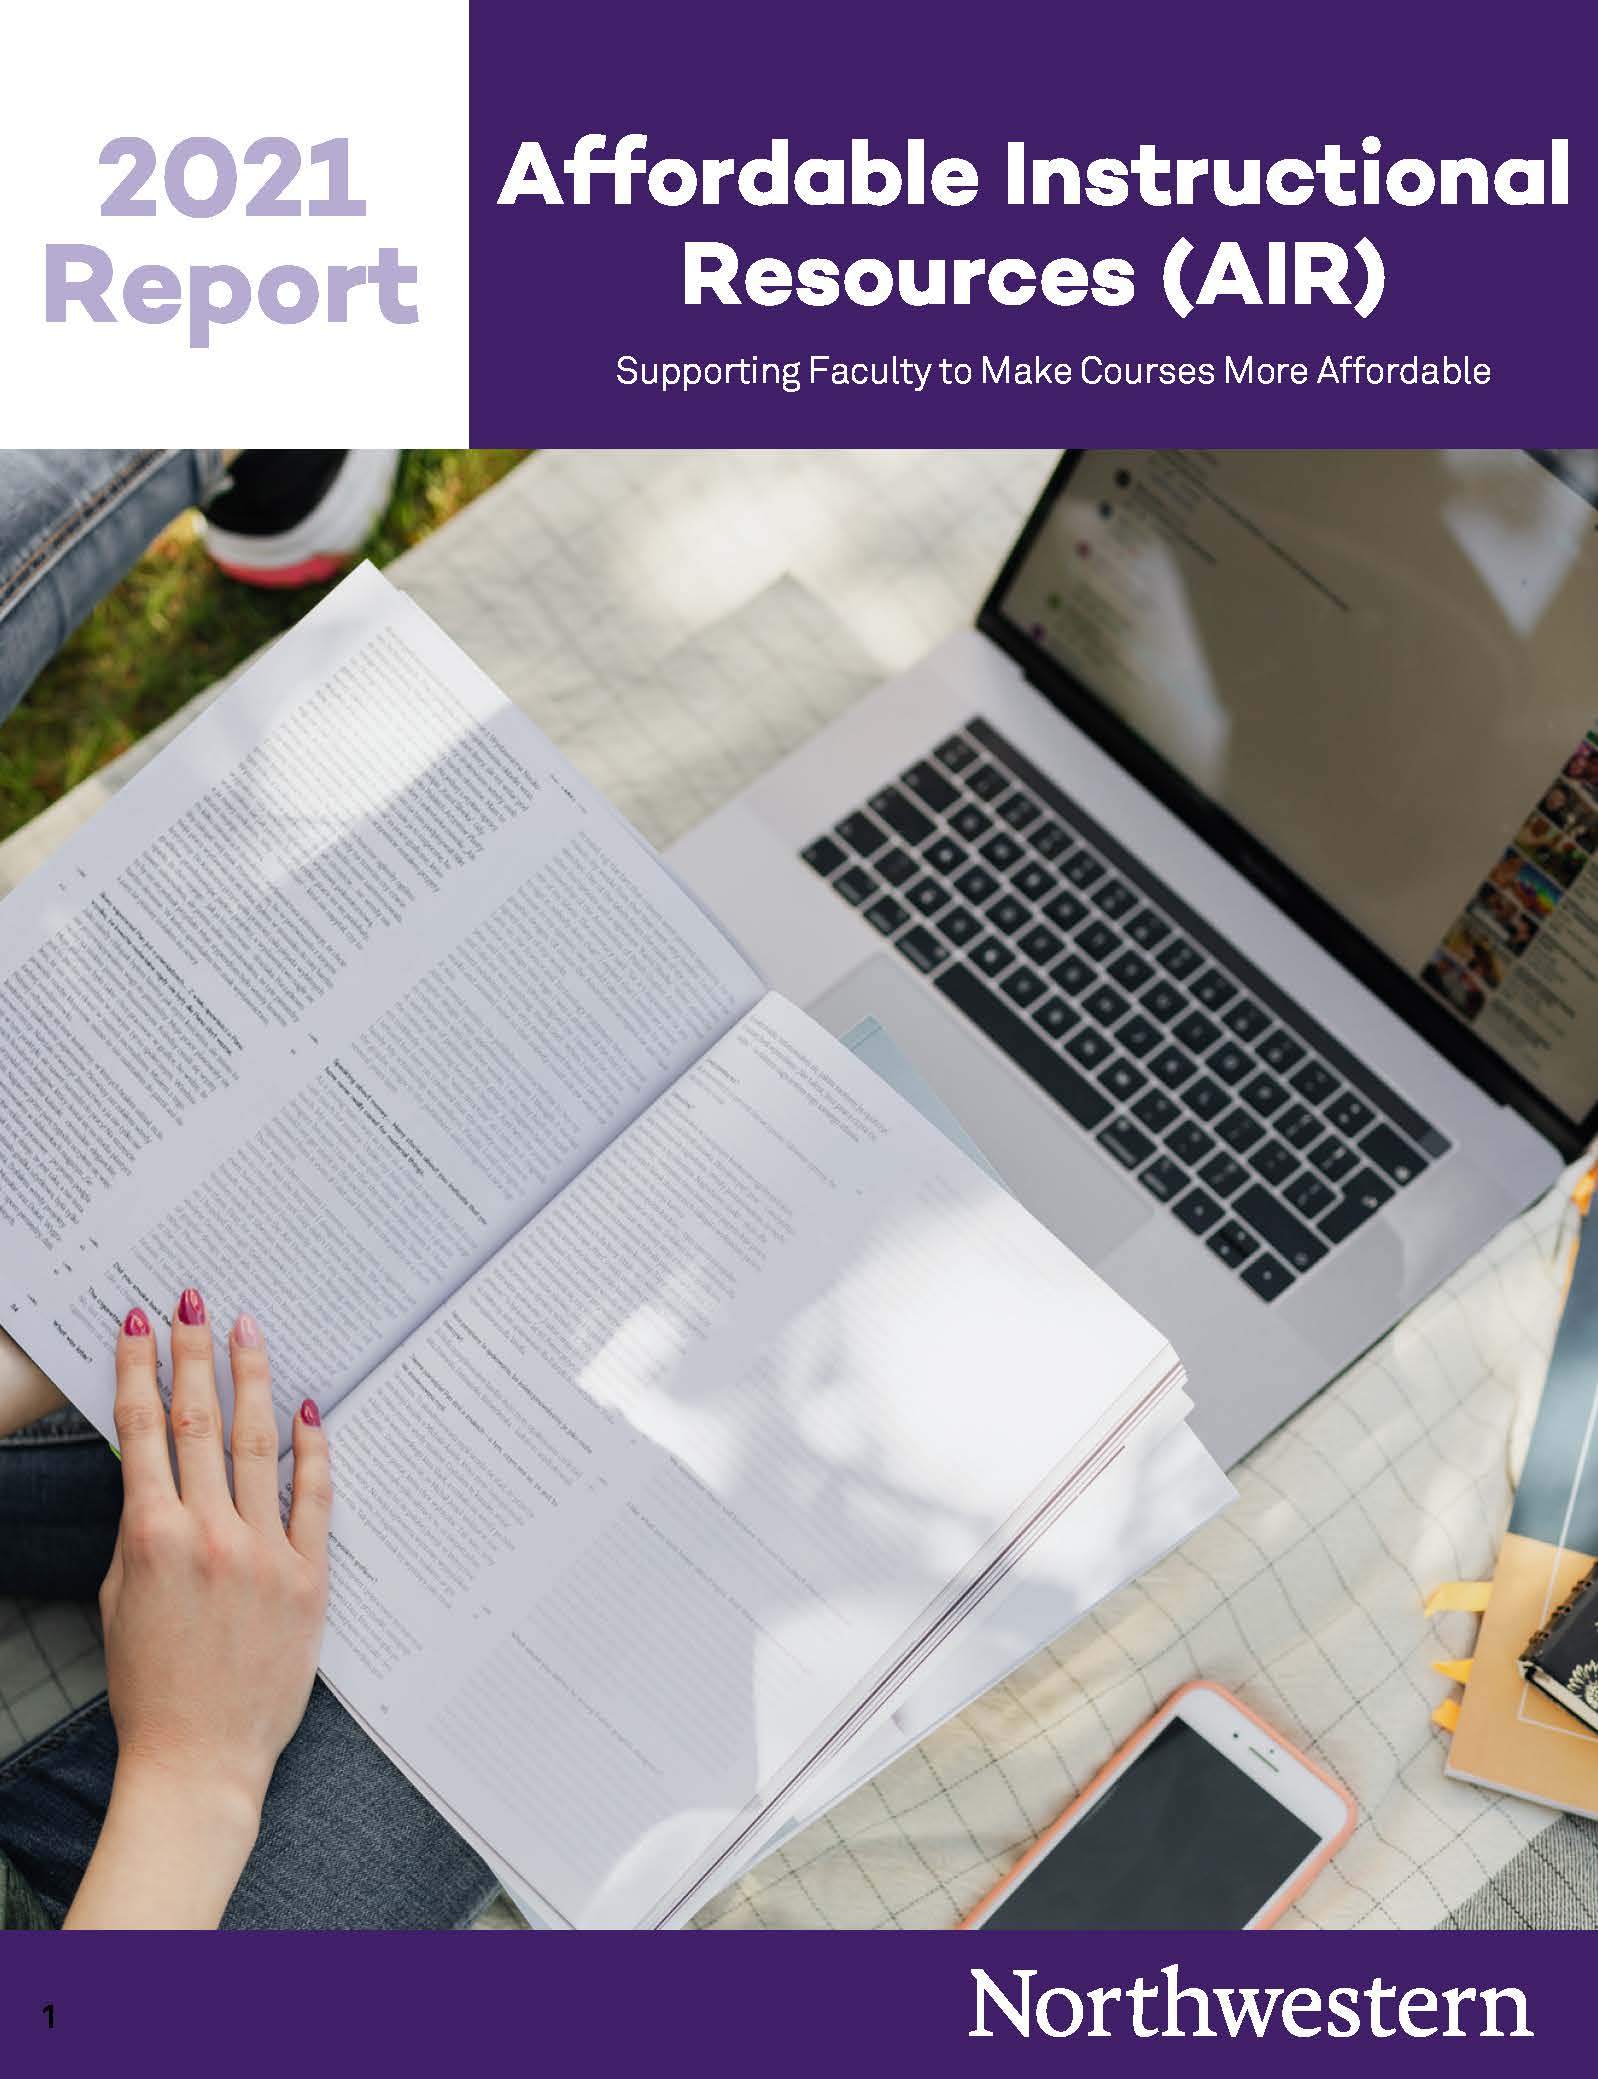 A report cover page shows a laptop. The headline reads "2021 Report: Affordable Instructional Resources (AIR), supporting faculty to make courses more affordable"